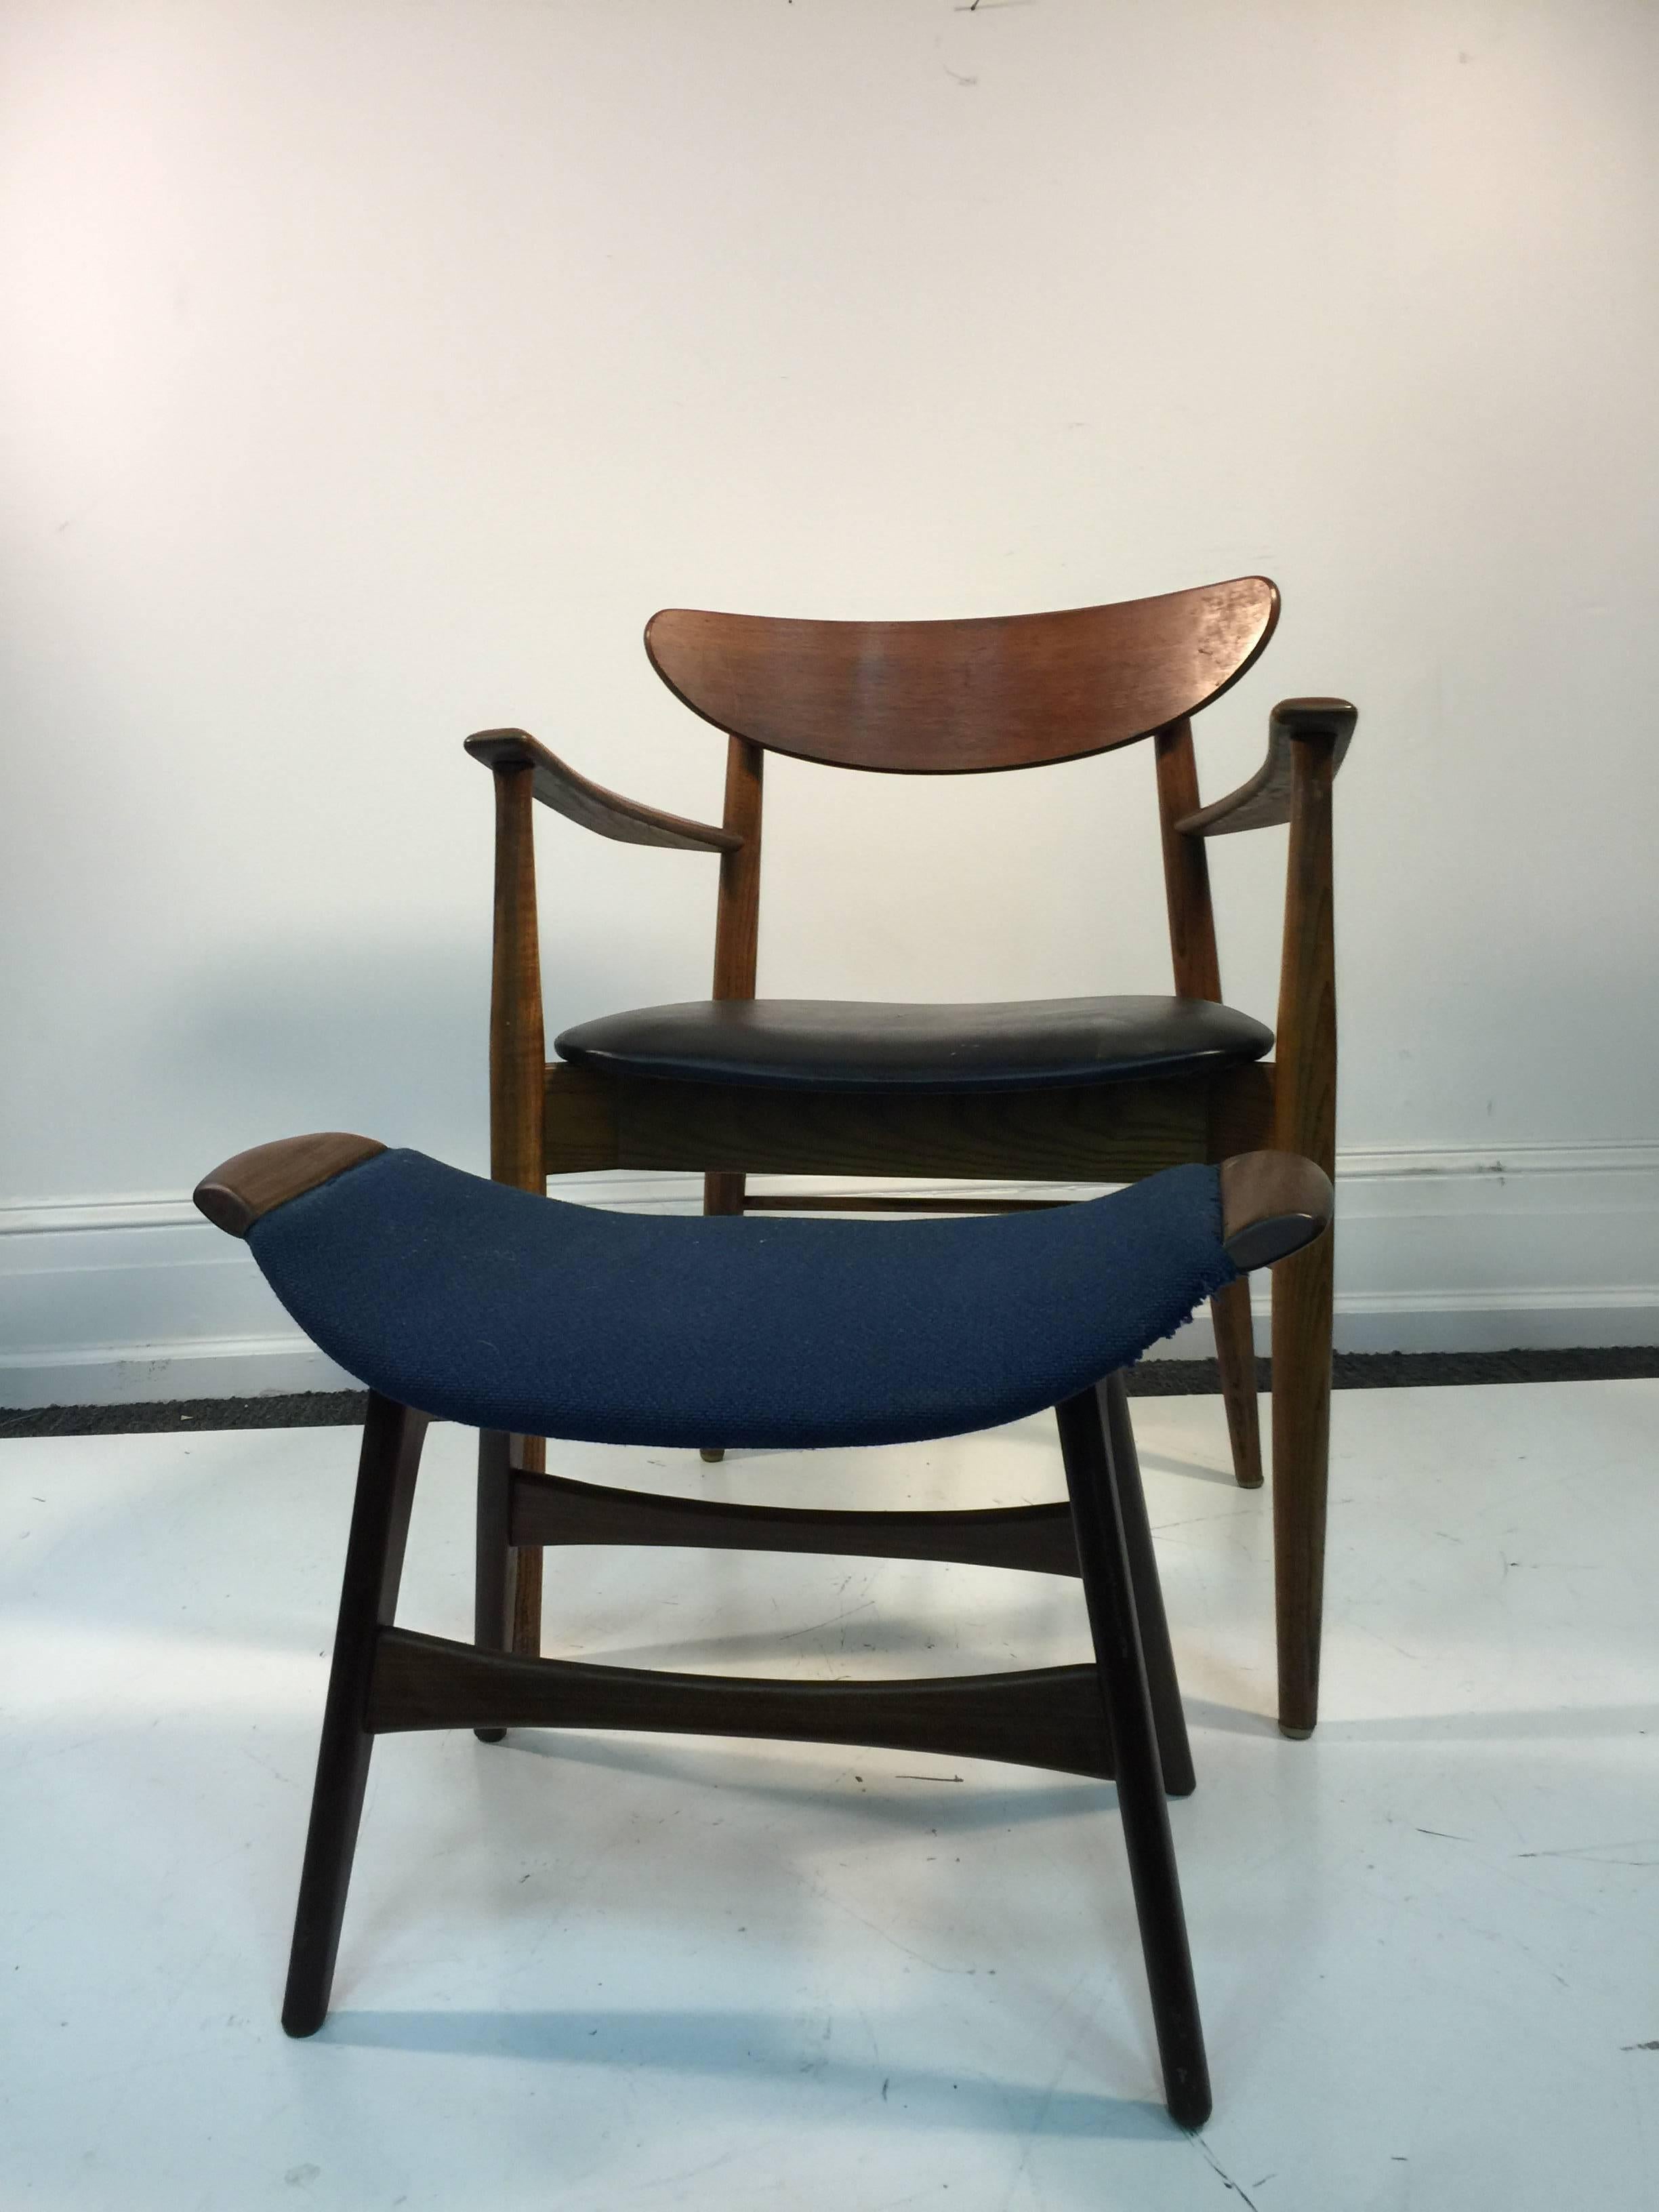 A Scandinavian Modern armchair and ottoman with tapered legs in the manner of Hans Wegner. Each piece is being sold separately. 

Ottoman: 26 W X 14 D x 15 H.
Chair: 32 W x 17 D x 24 H x 18 S.